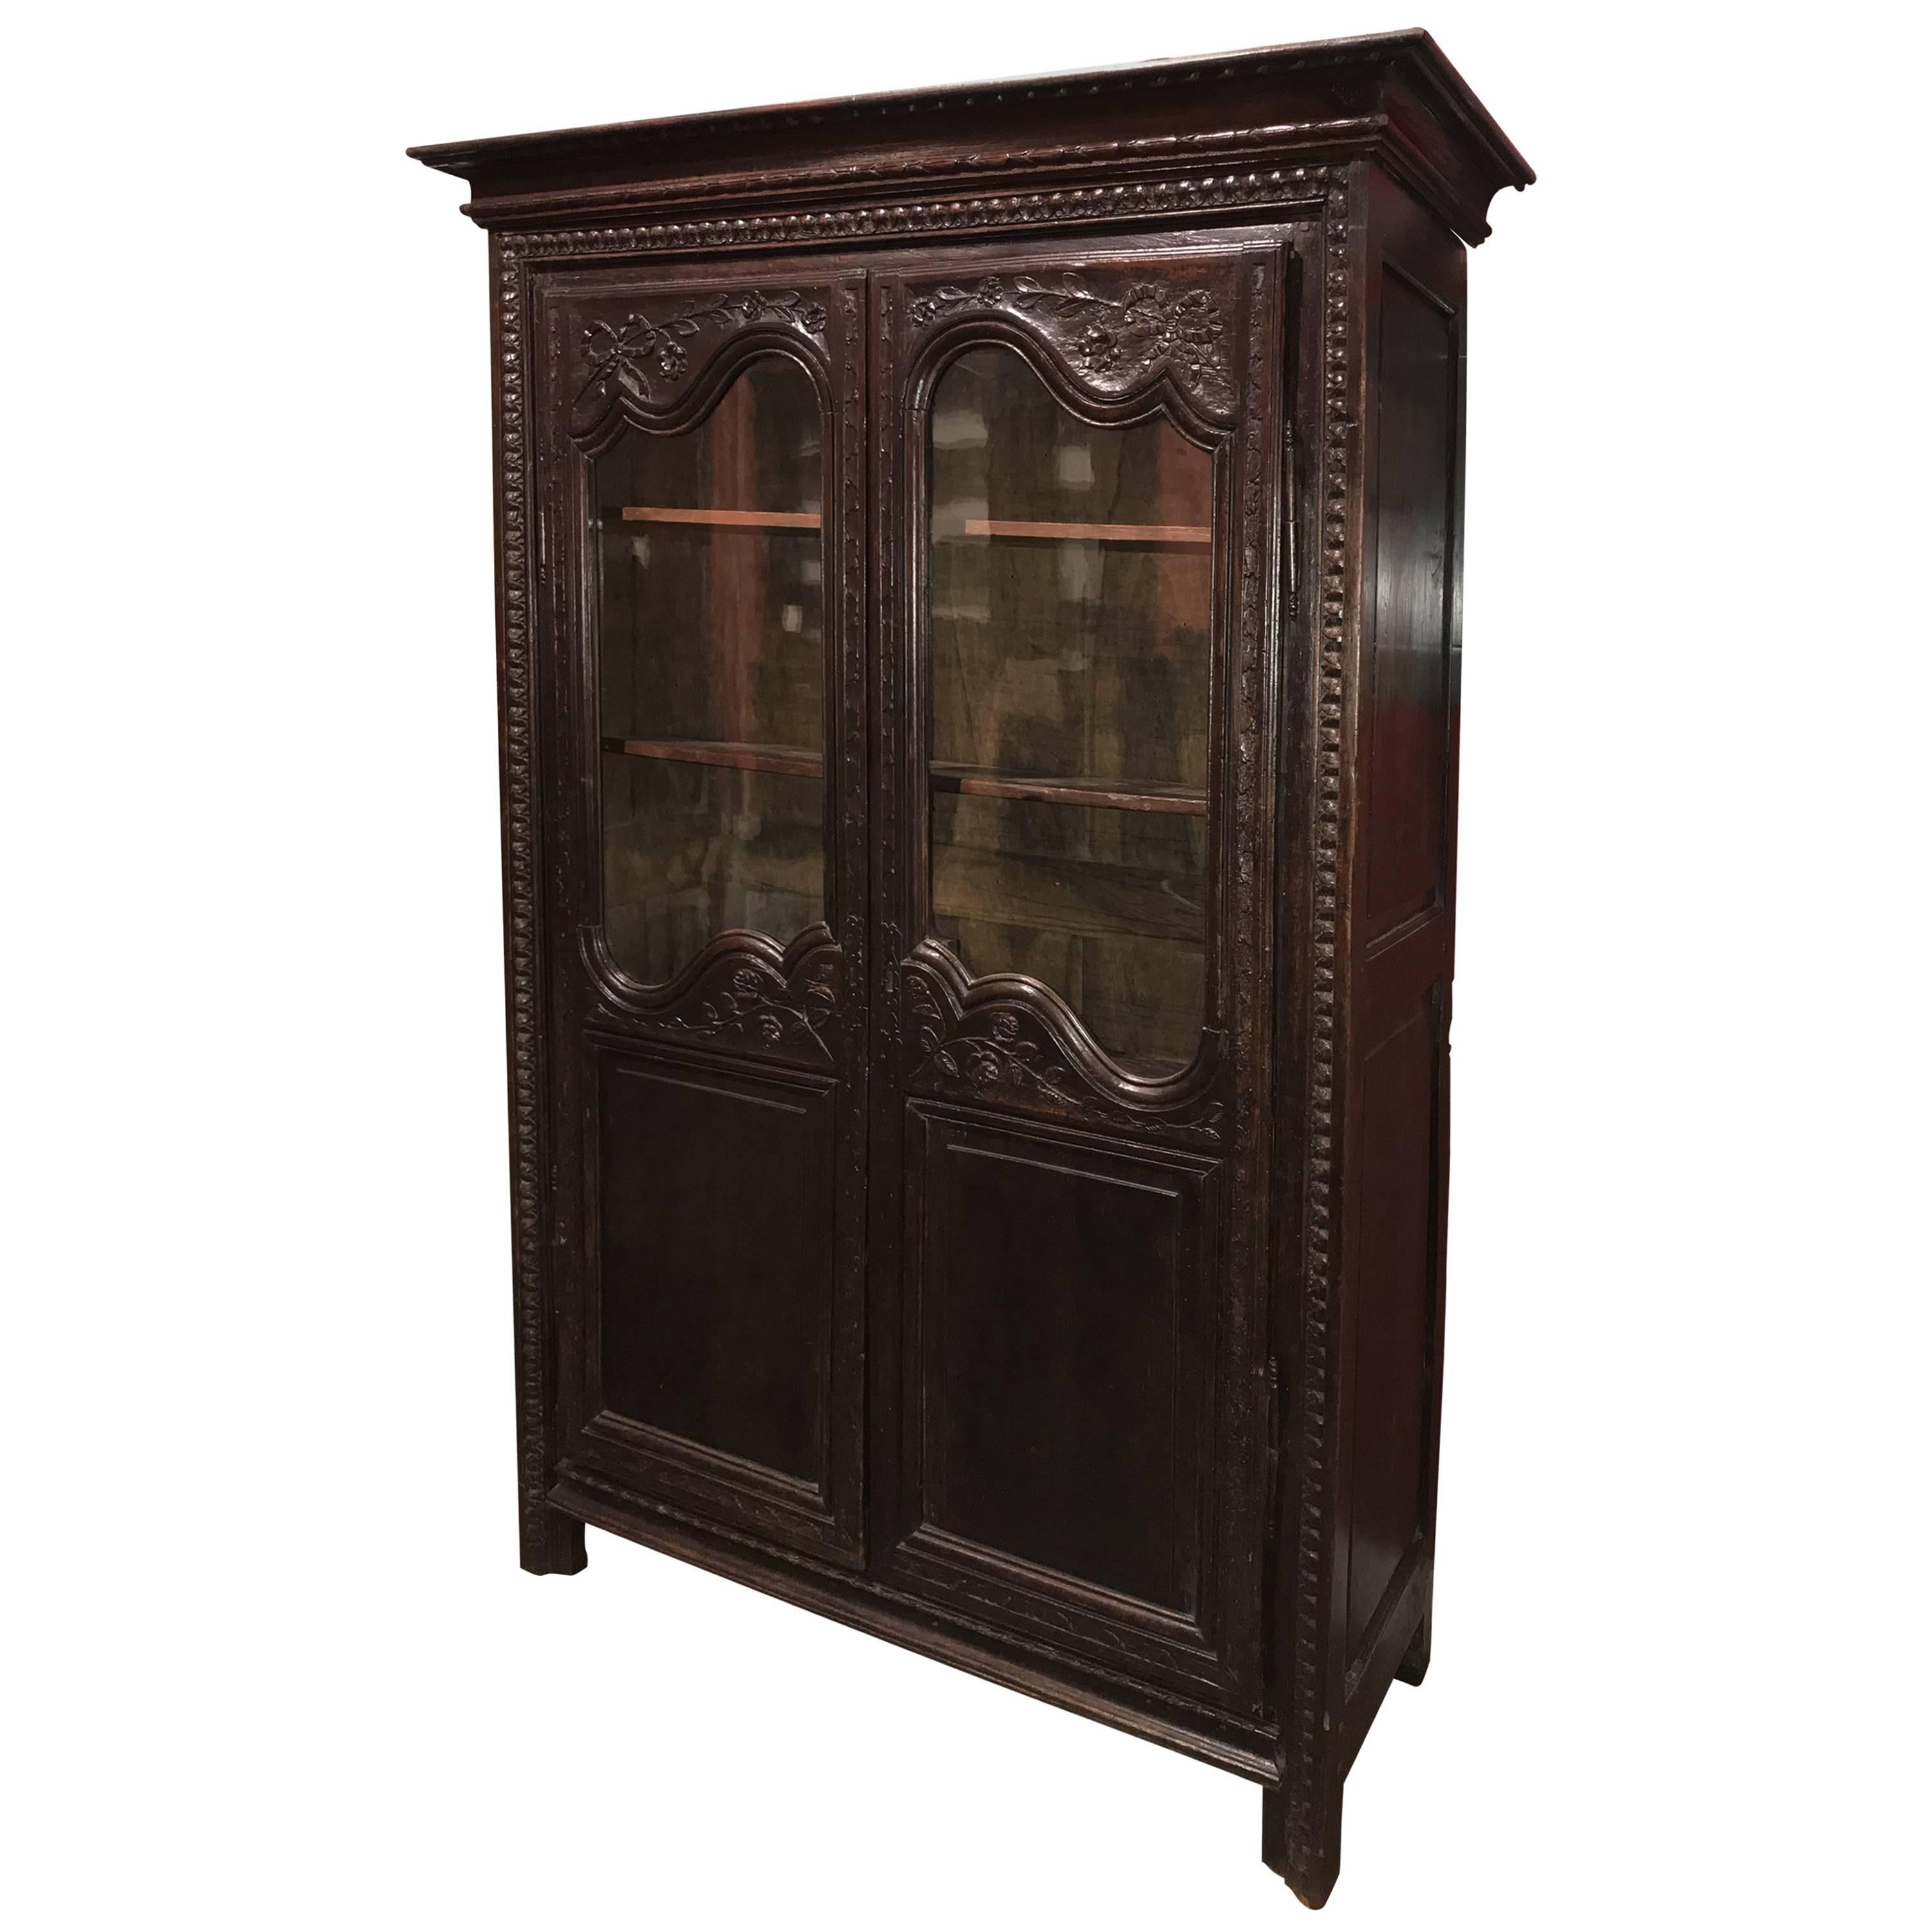 Late 18th Century Louis XVI French Walnut Two-Door Bookcase